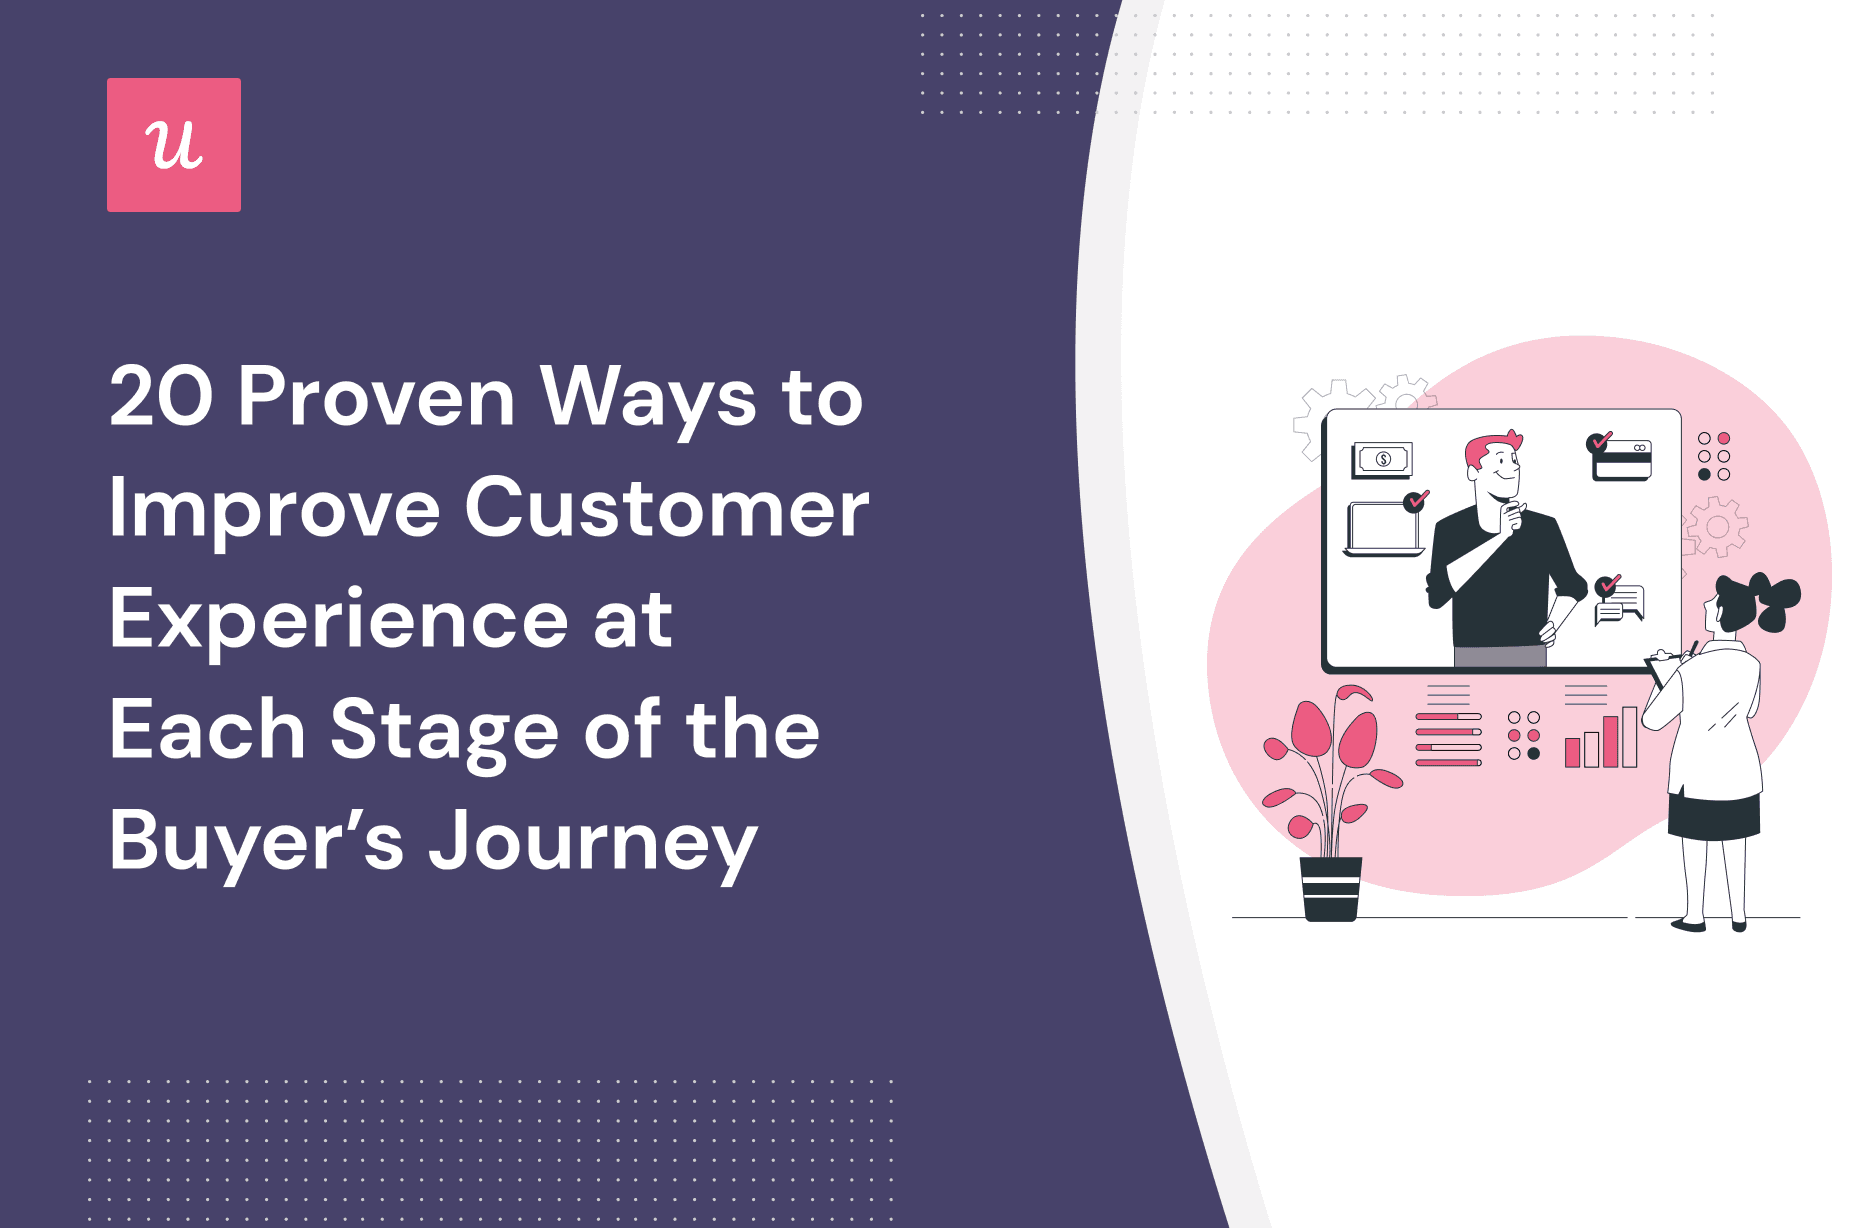 20 Proven Ways to Improve Customer Experience at Each Stage of The Buyer’s Journey cover